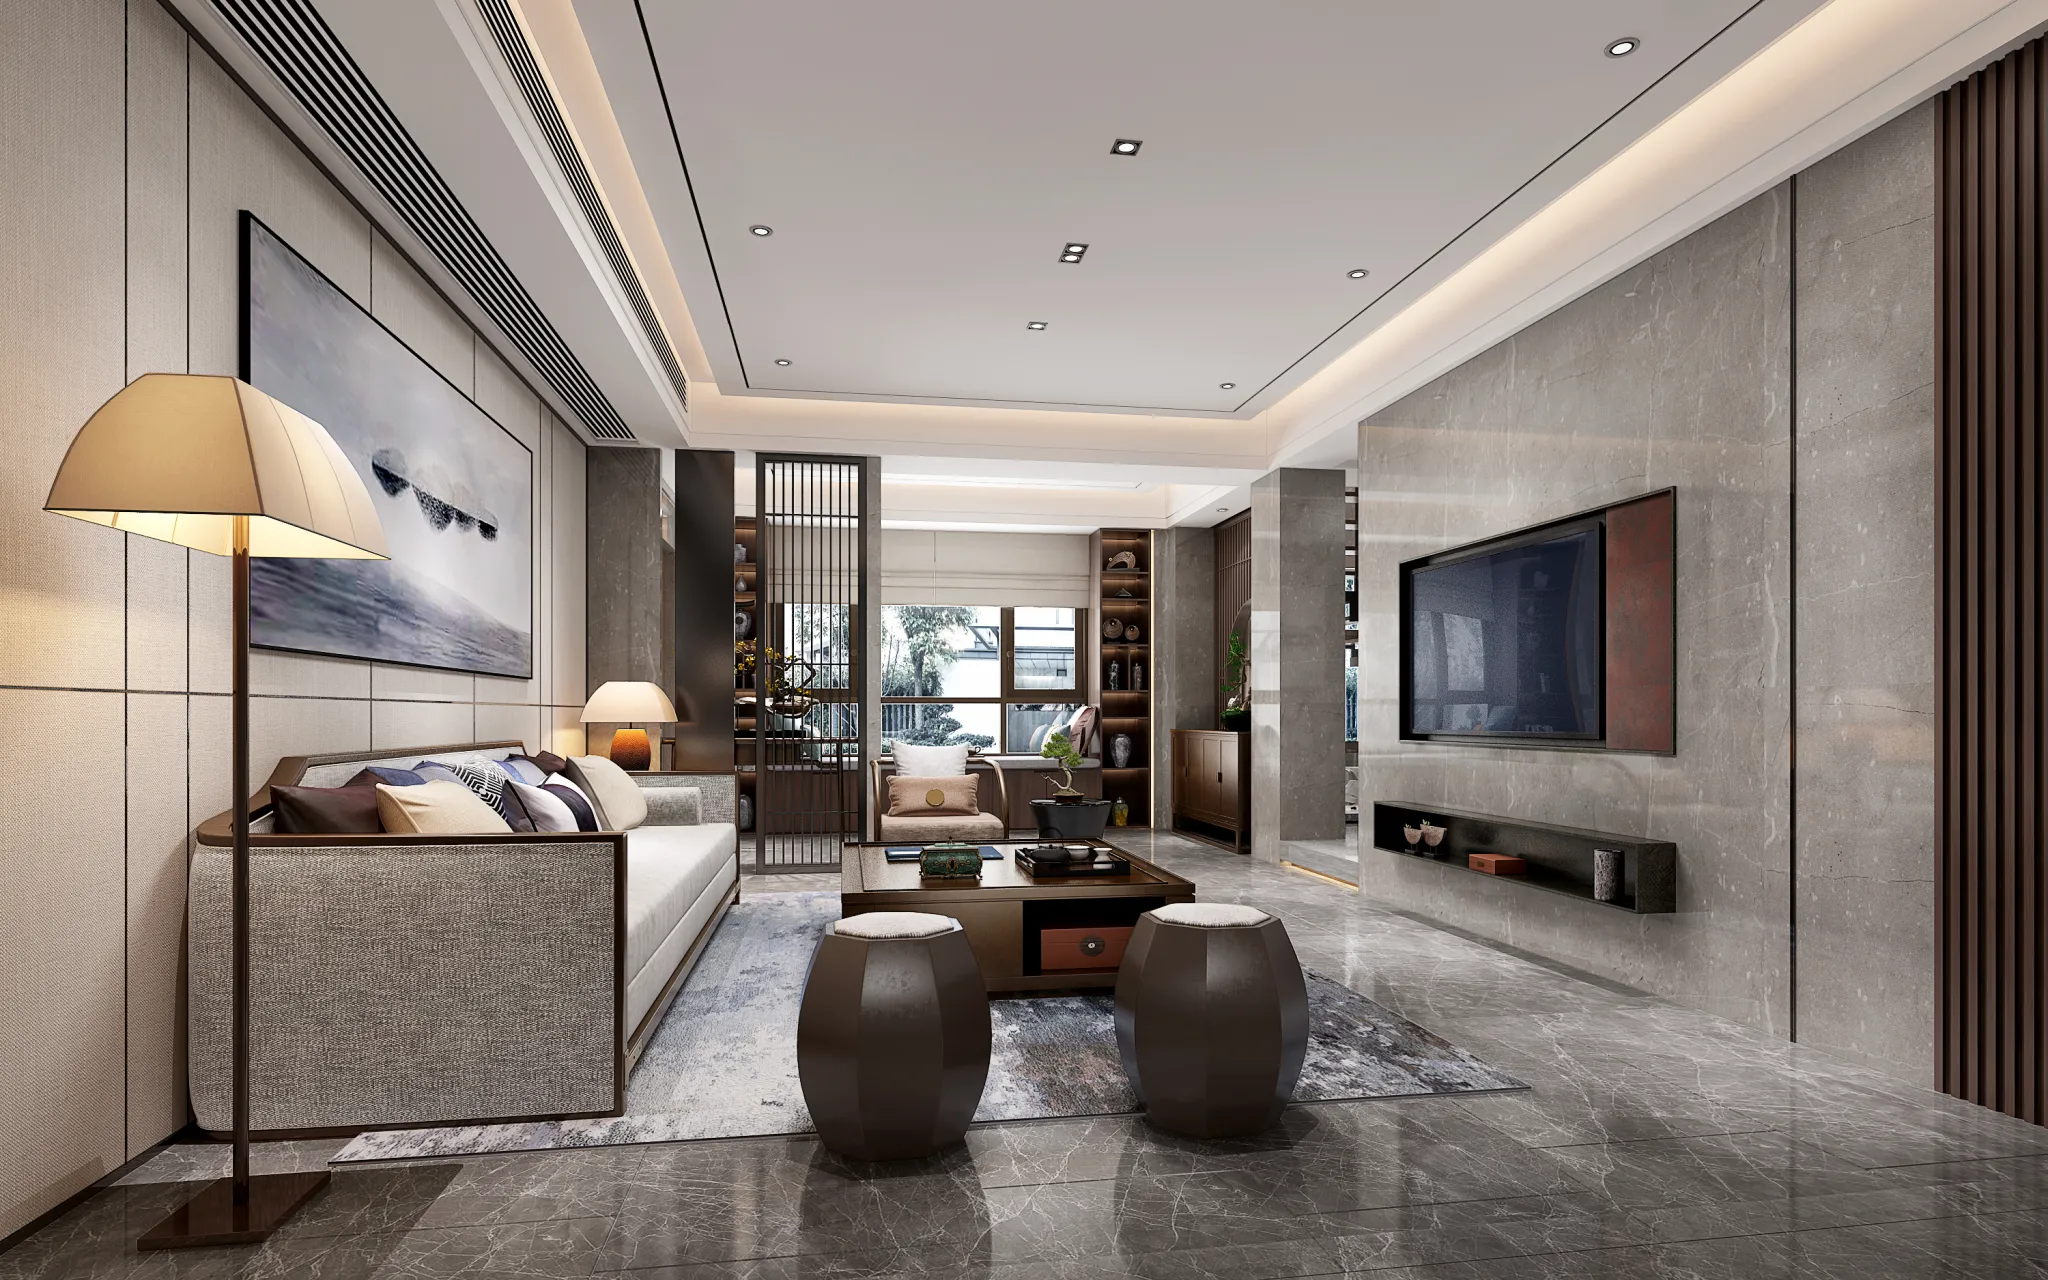 DESMOD INTERIOR 2021 (VRAY) – 4. LIVING ROOM – CHINESE – 010